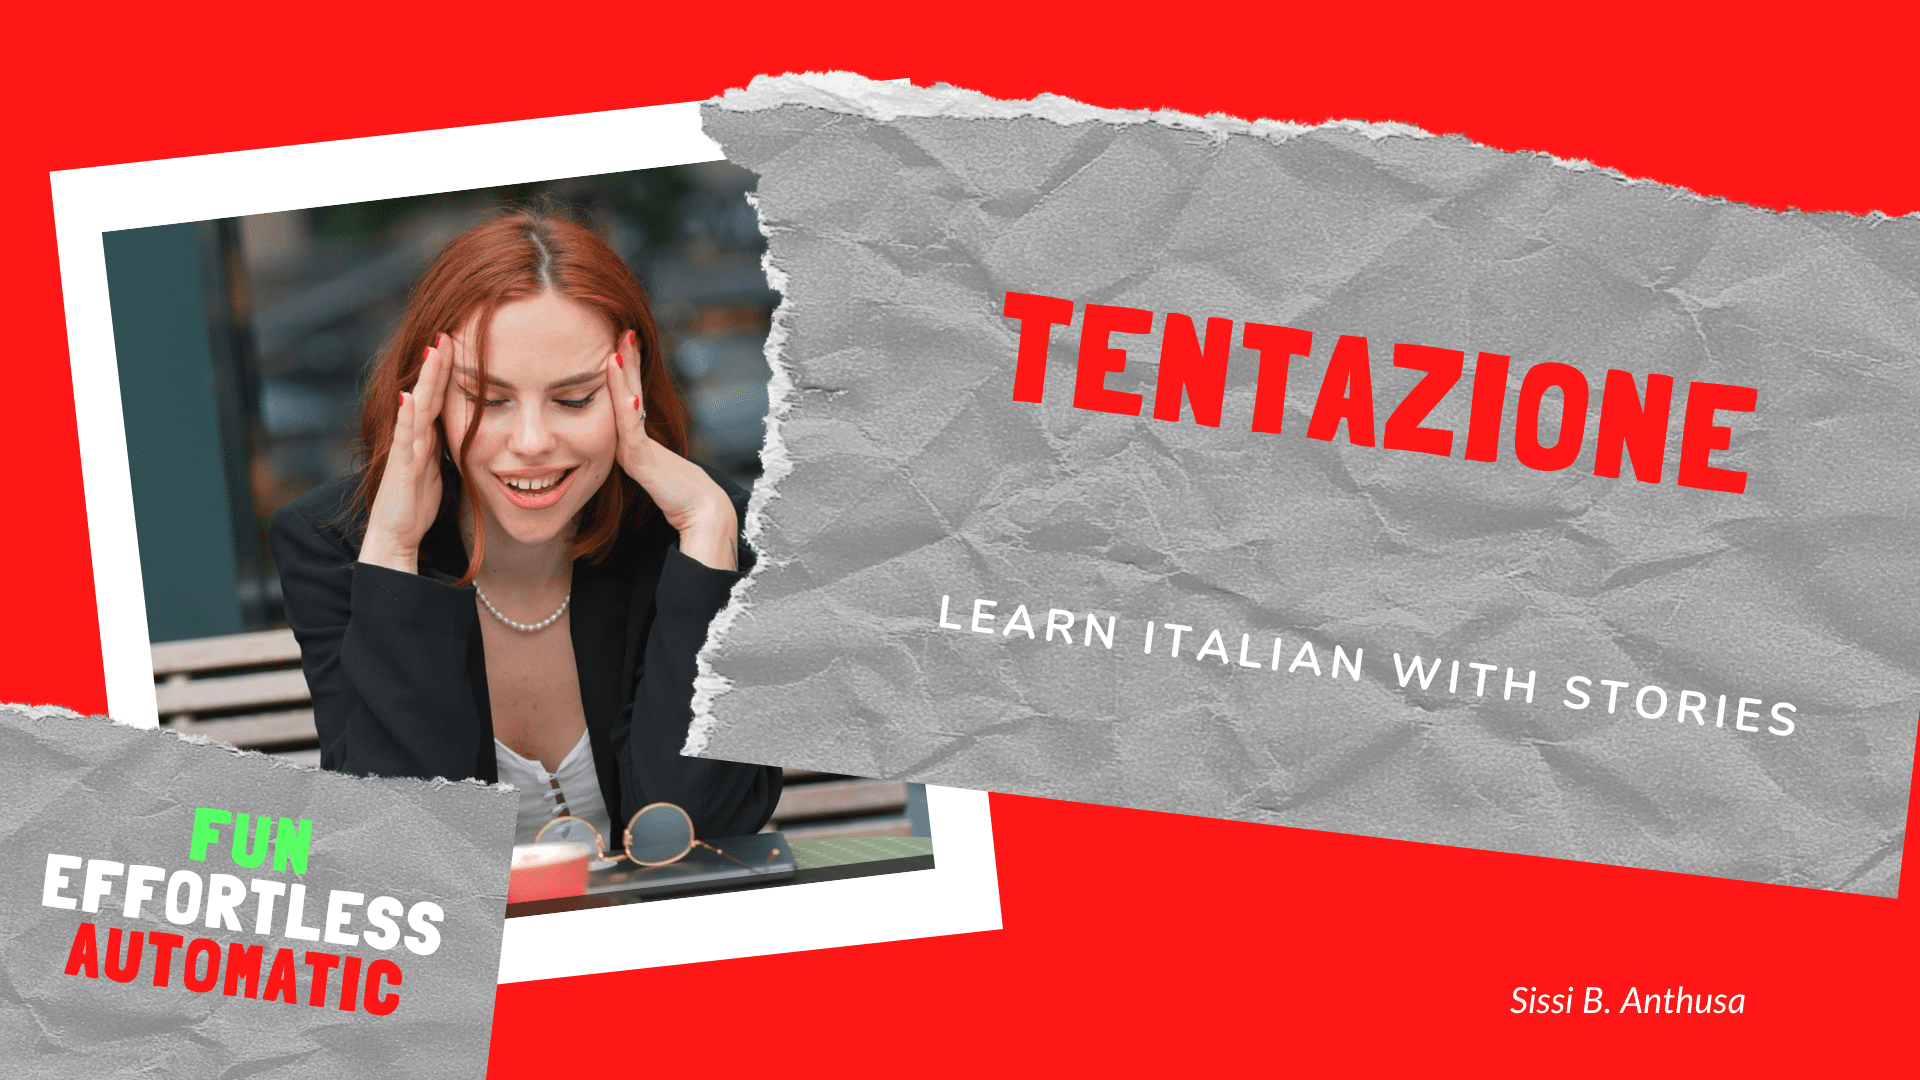 Explore the beauty of the Italian language and culture with our engaging mini-stories. Learn Italian effortlessly while enjoying captivating tales. Unlock your Italian language potential with our unique approach.